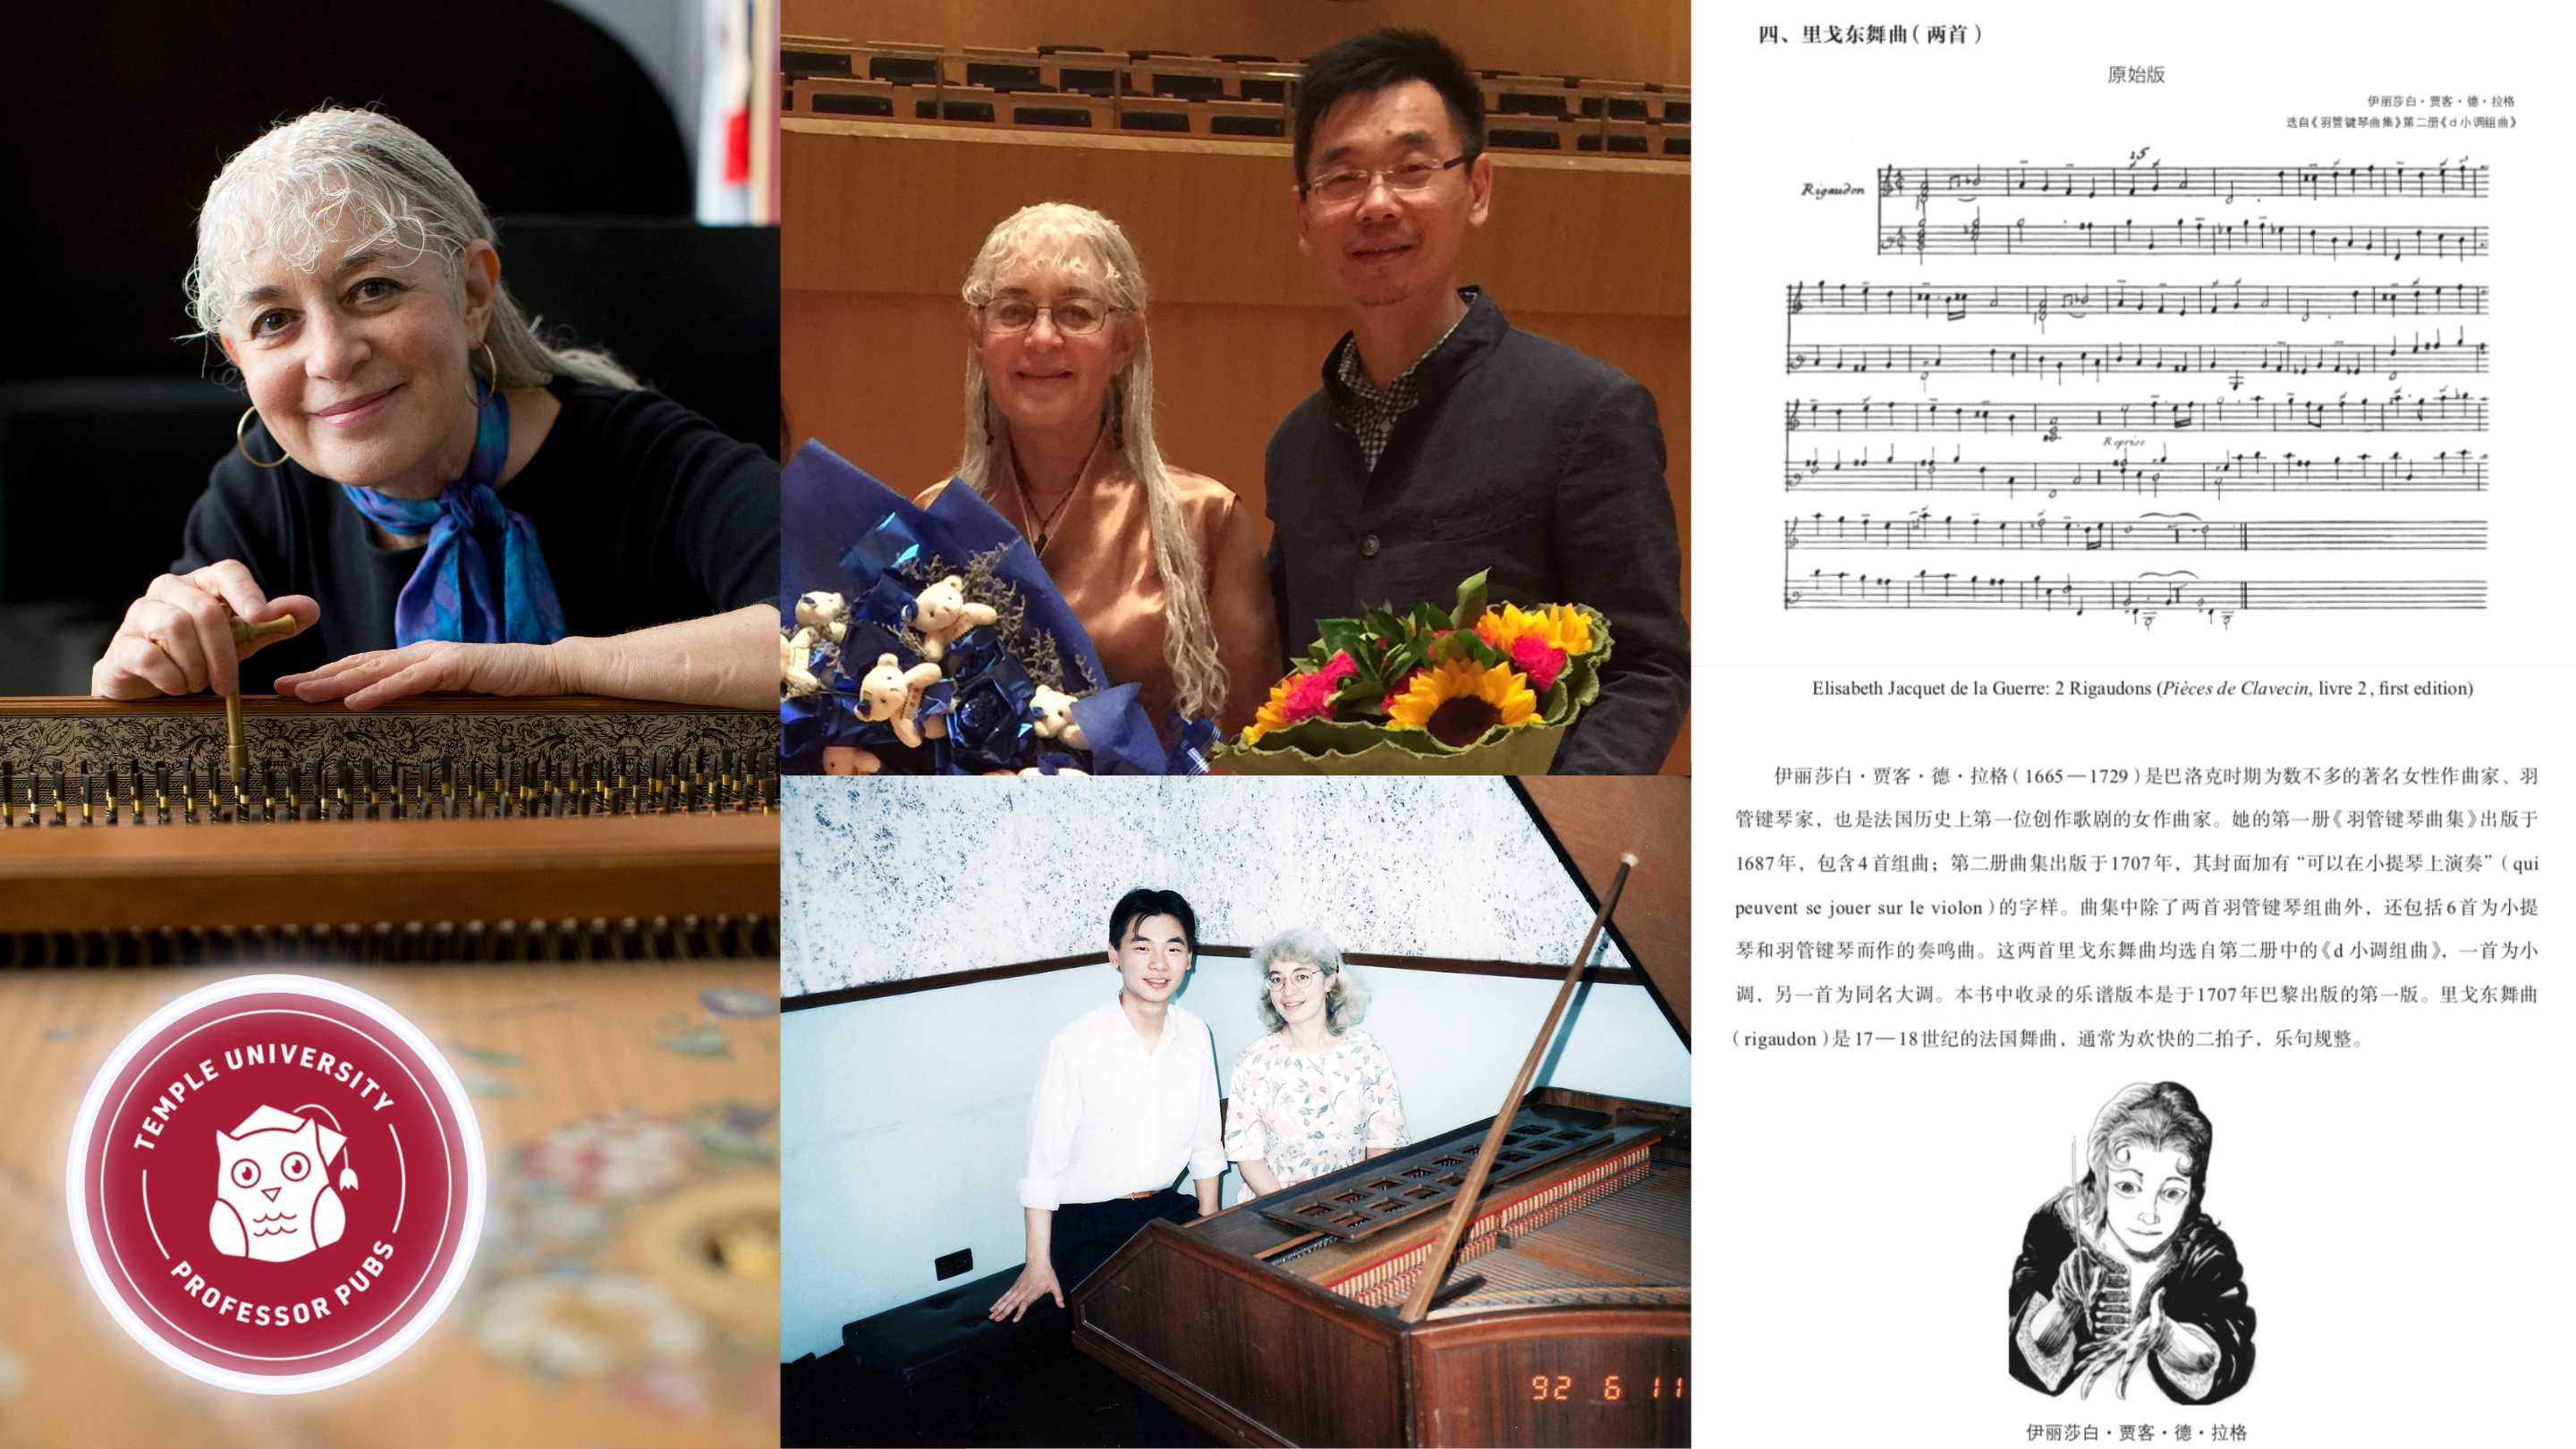 Joyce Lindorff’s Book on Baroque Music Celebrates her Career in China